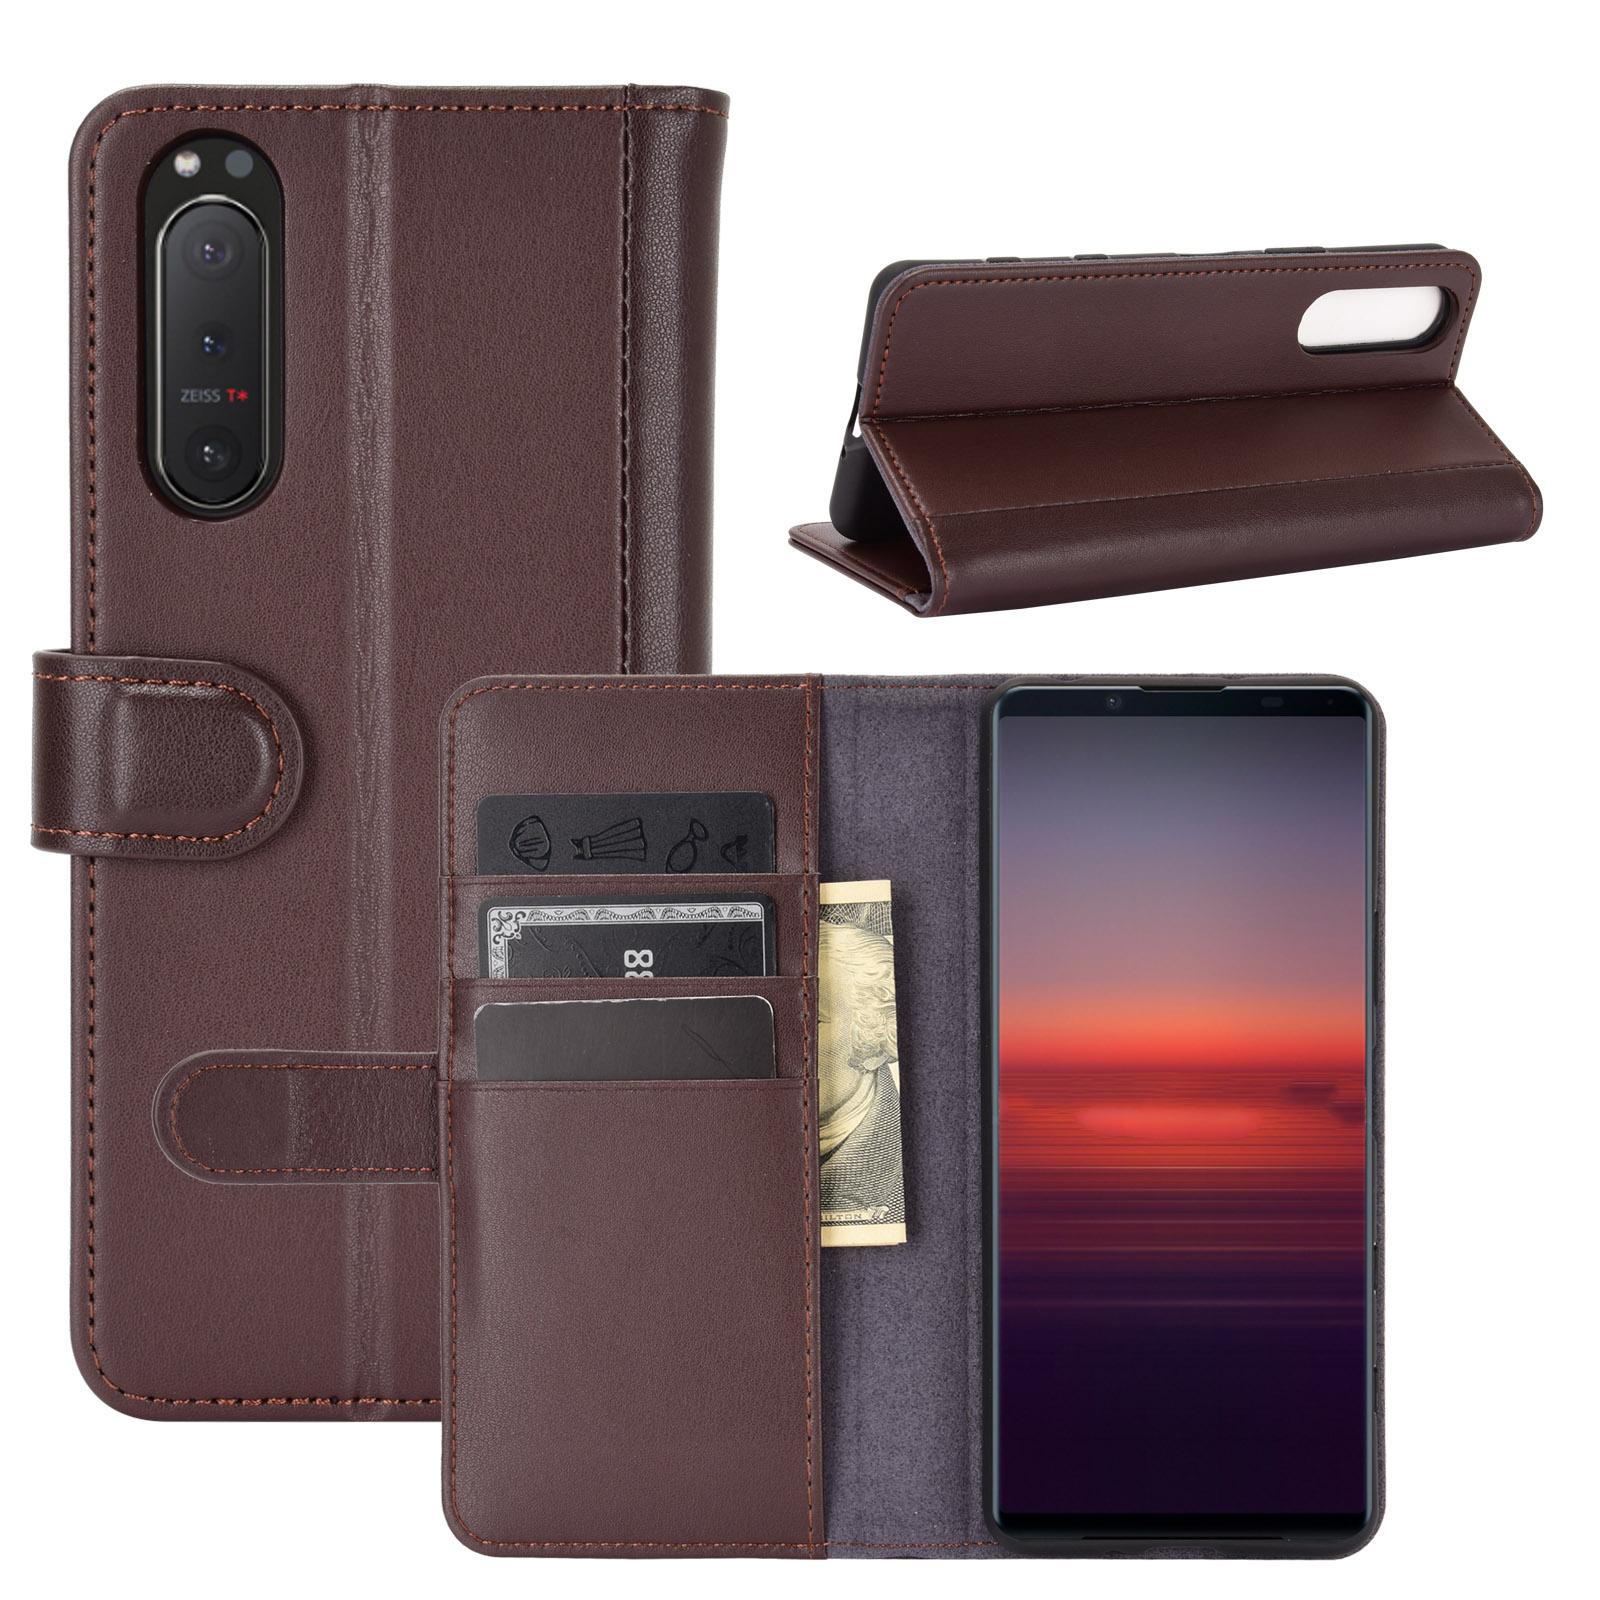 Sony Xperia 5 II Genuine Leather Wallet Case Brown